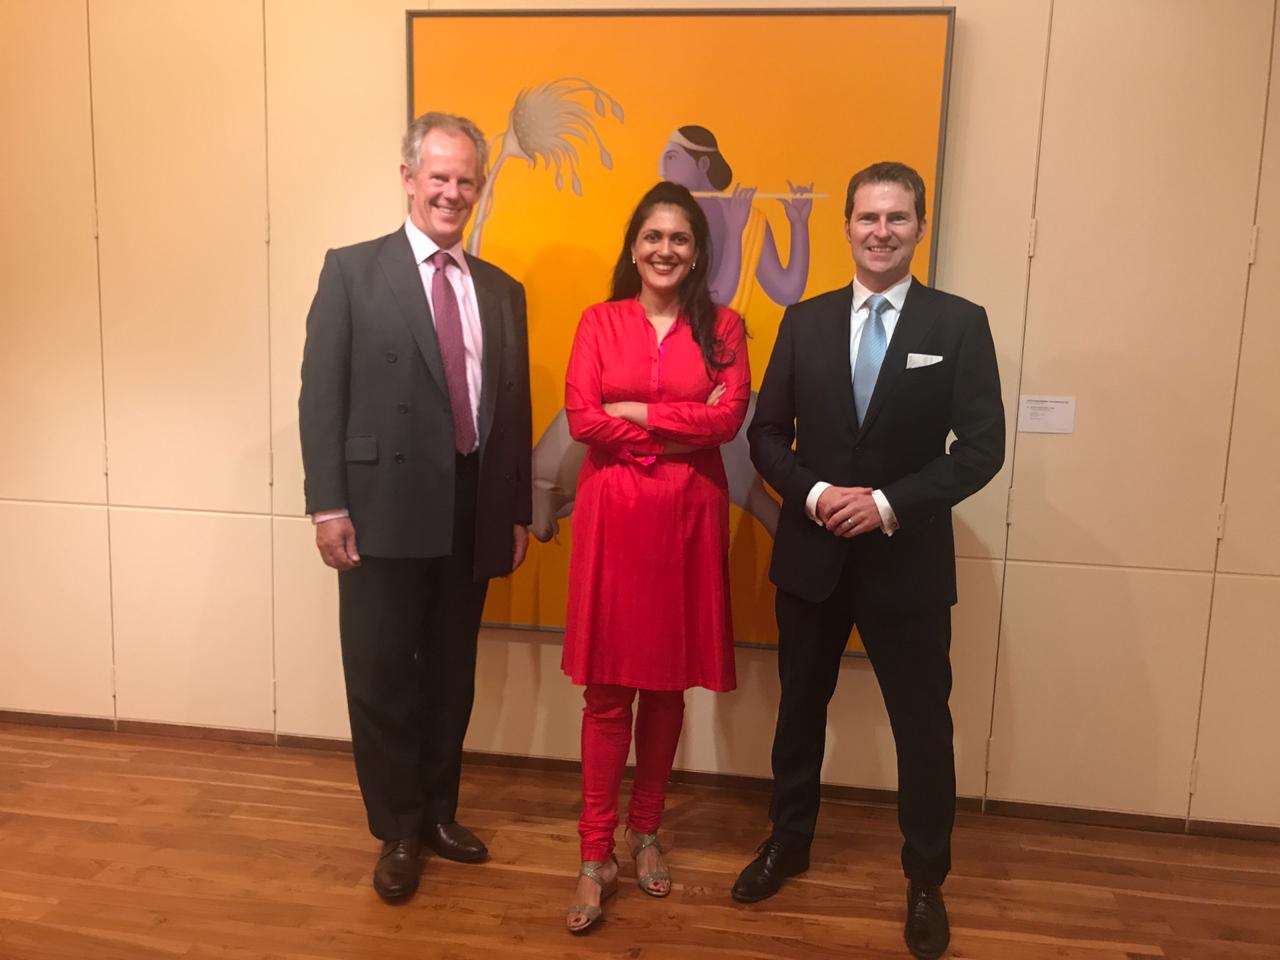 Dr William Robinson, Sonal Singh and Dr Bertold Mueller of Christie’s